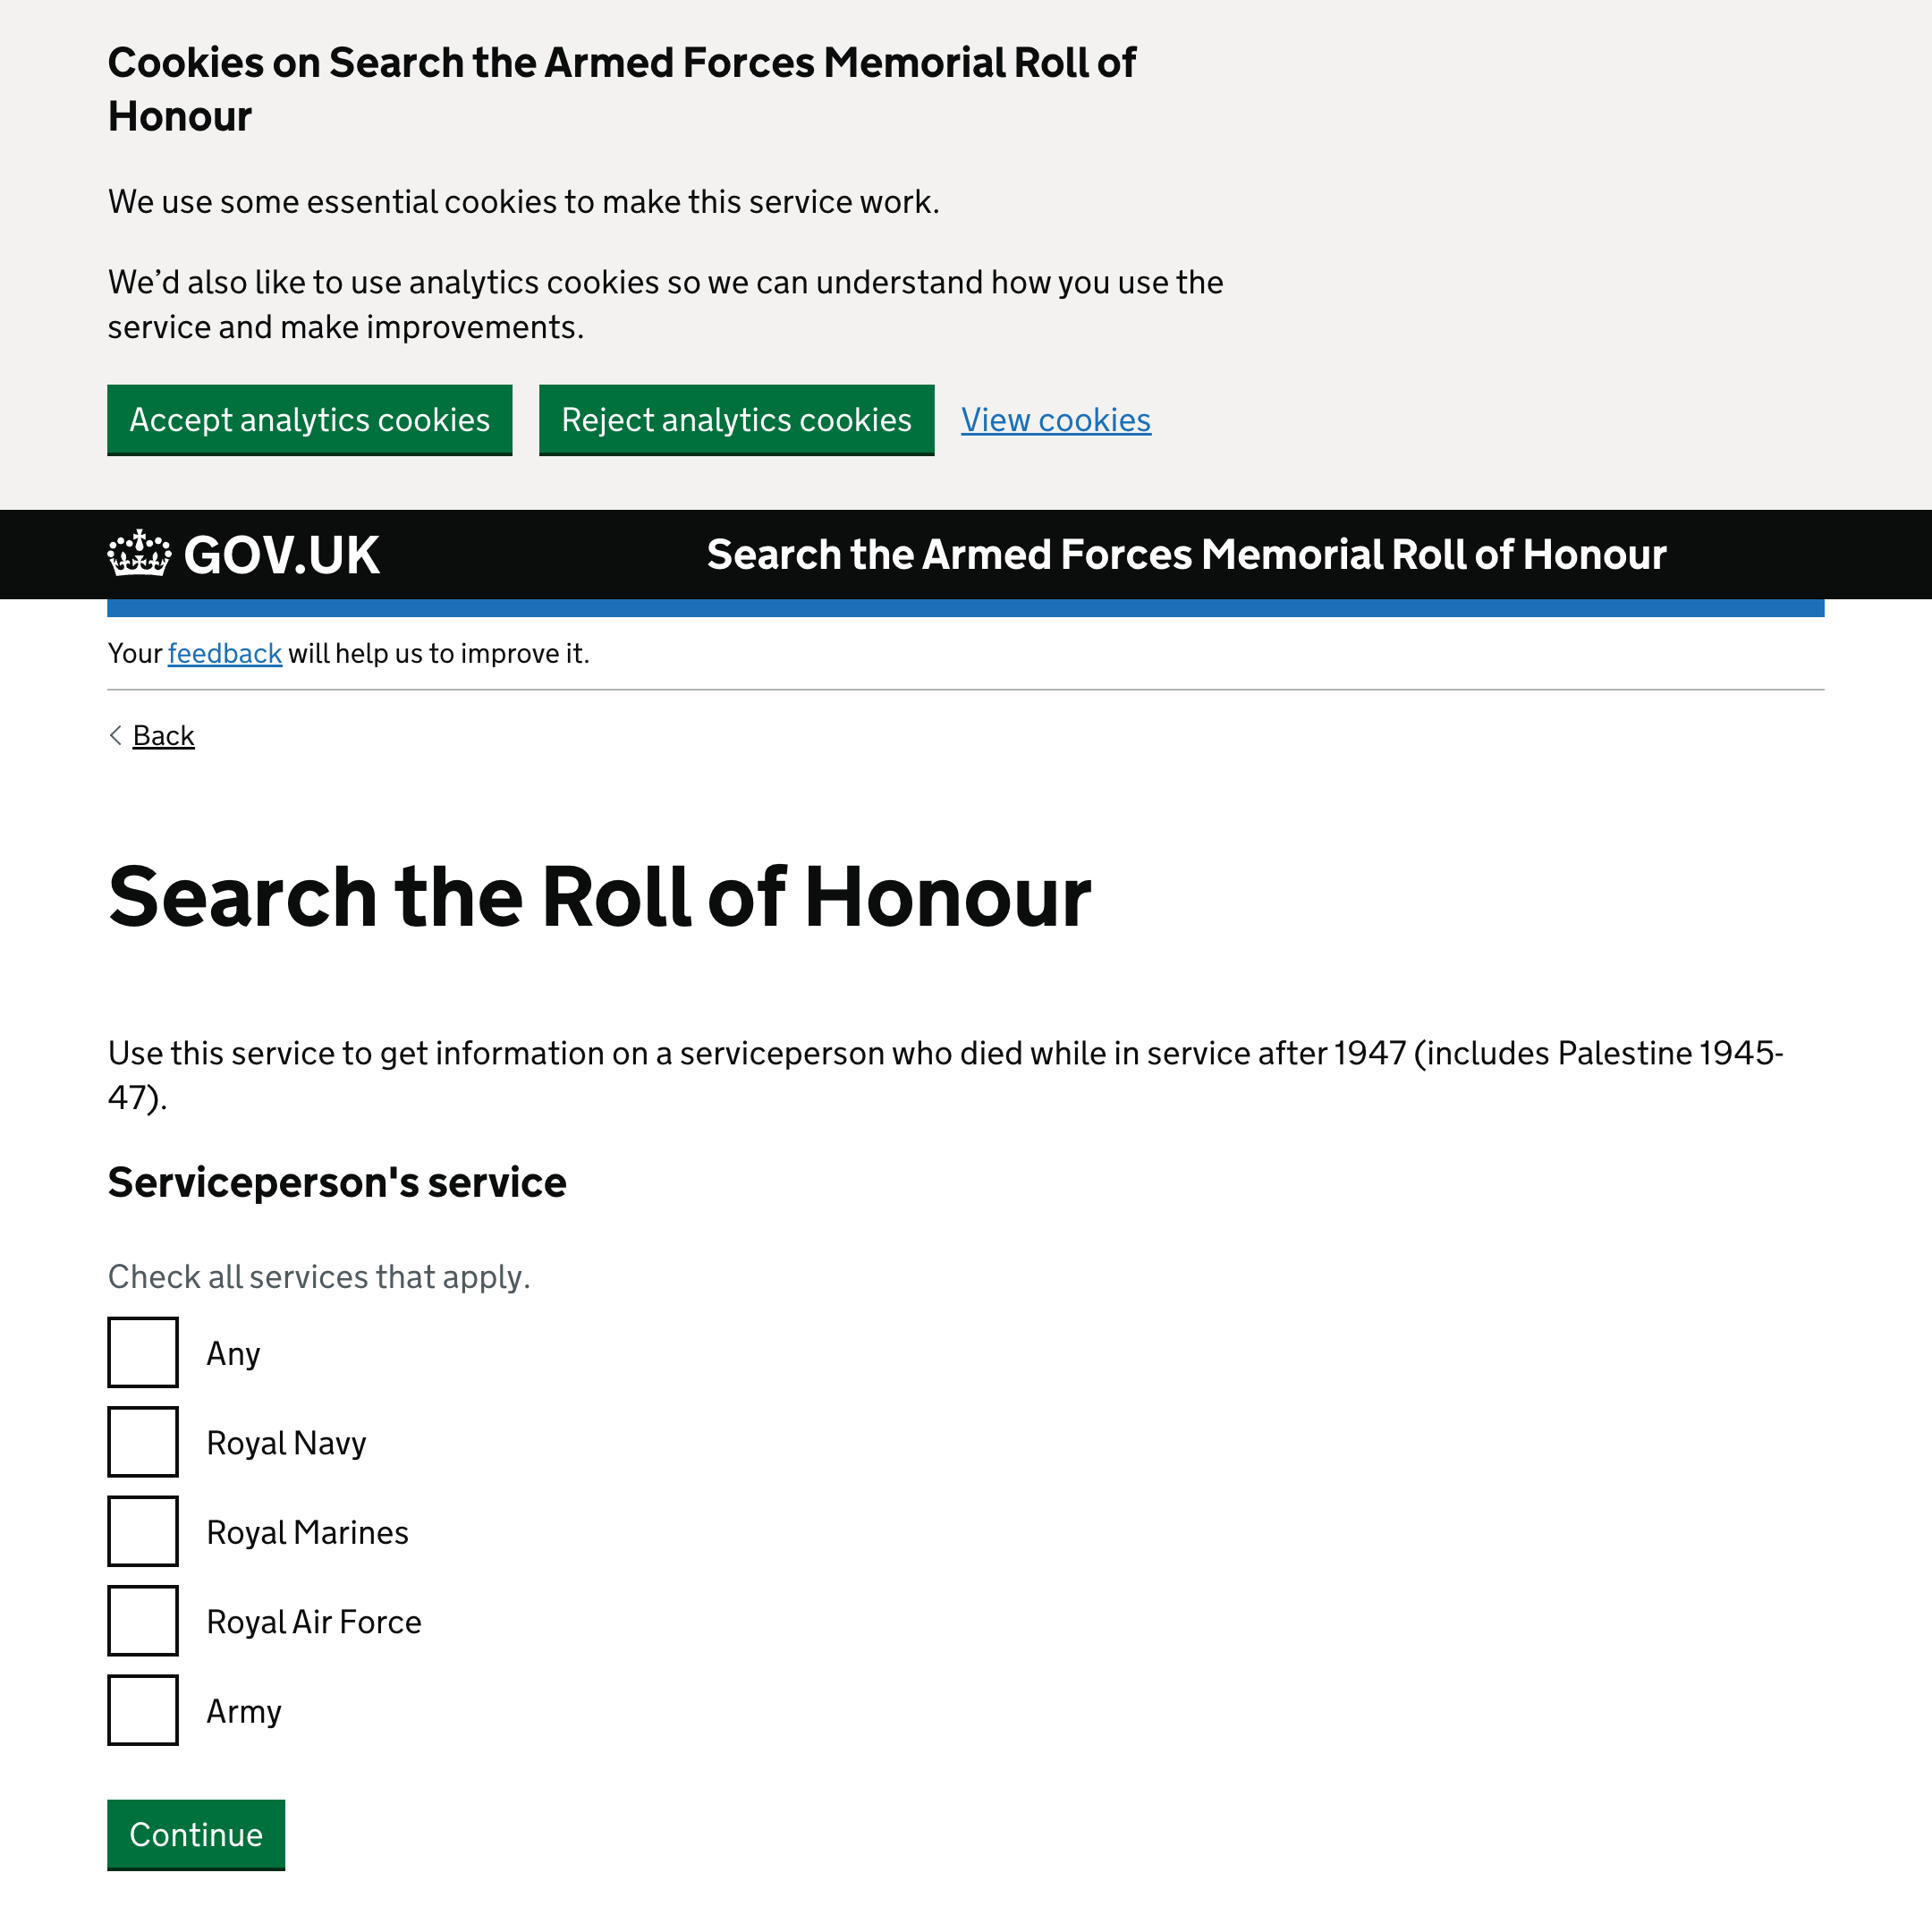 Search the Armed Forces Memorial Roll of Honour